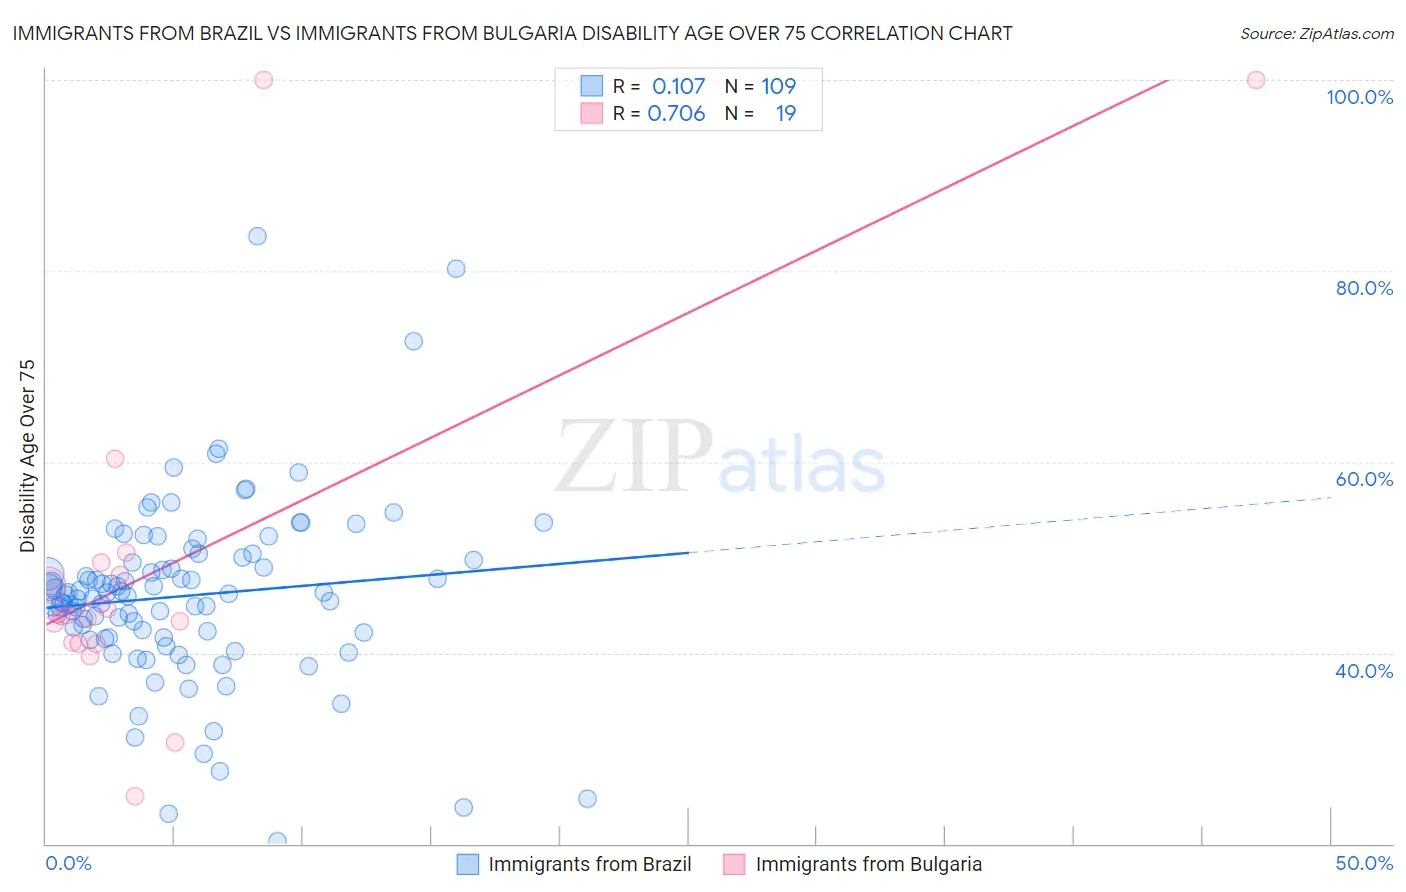 Immigrants from Brazil vs Immigrants from Bulgaria Disability Age Over 75